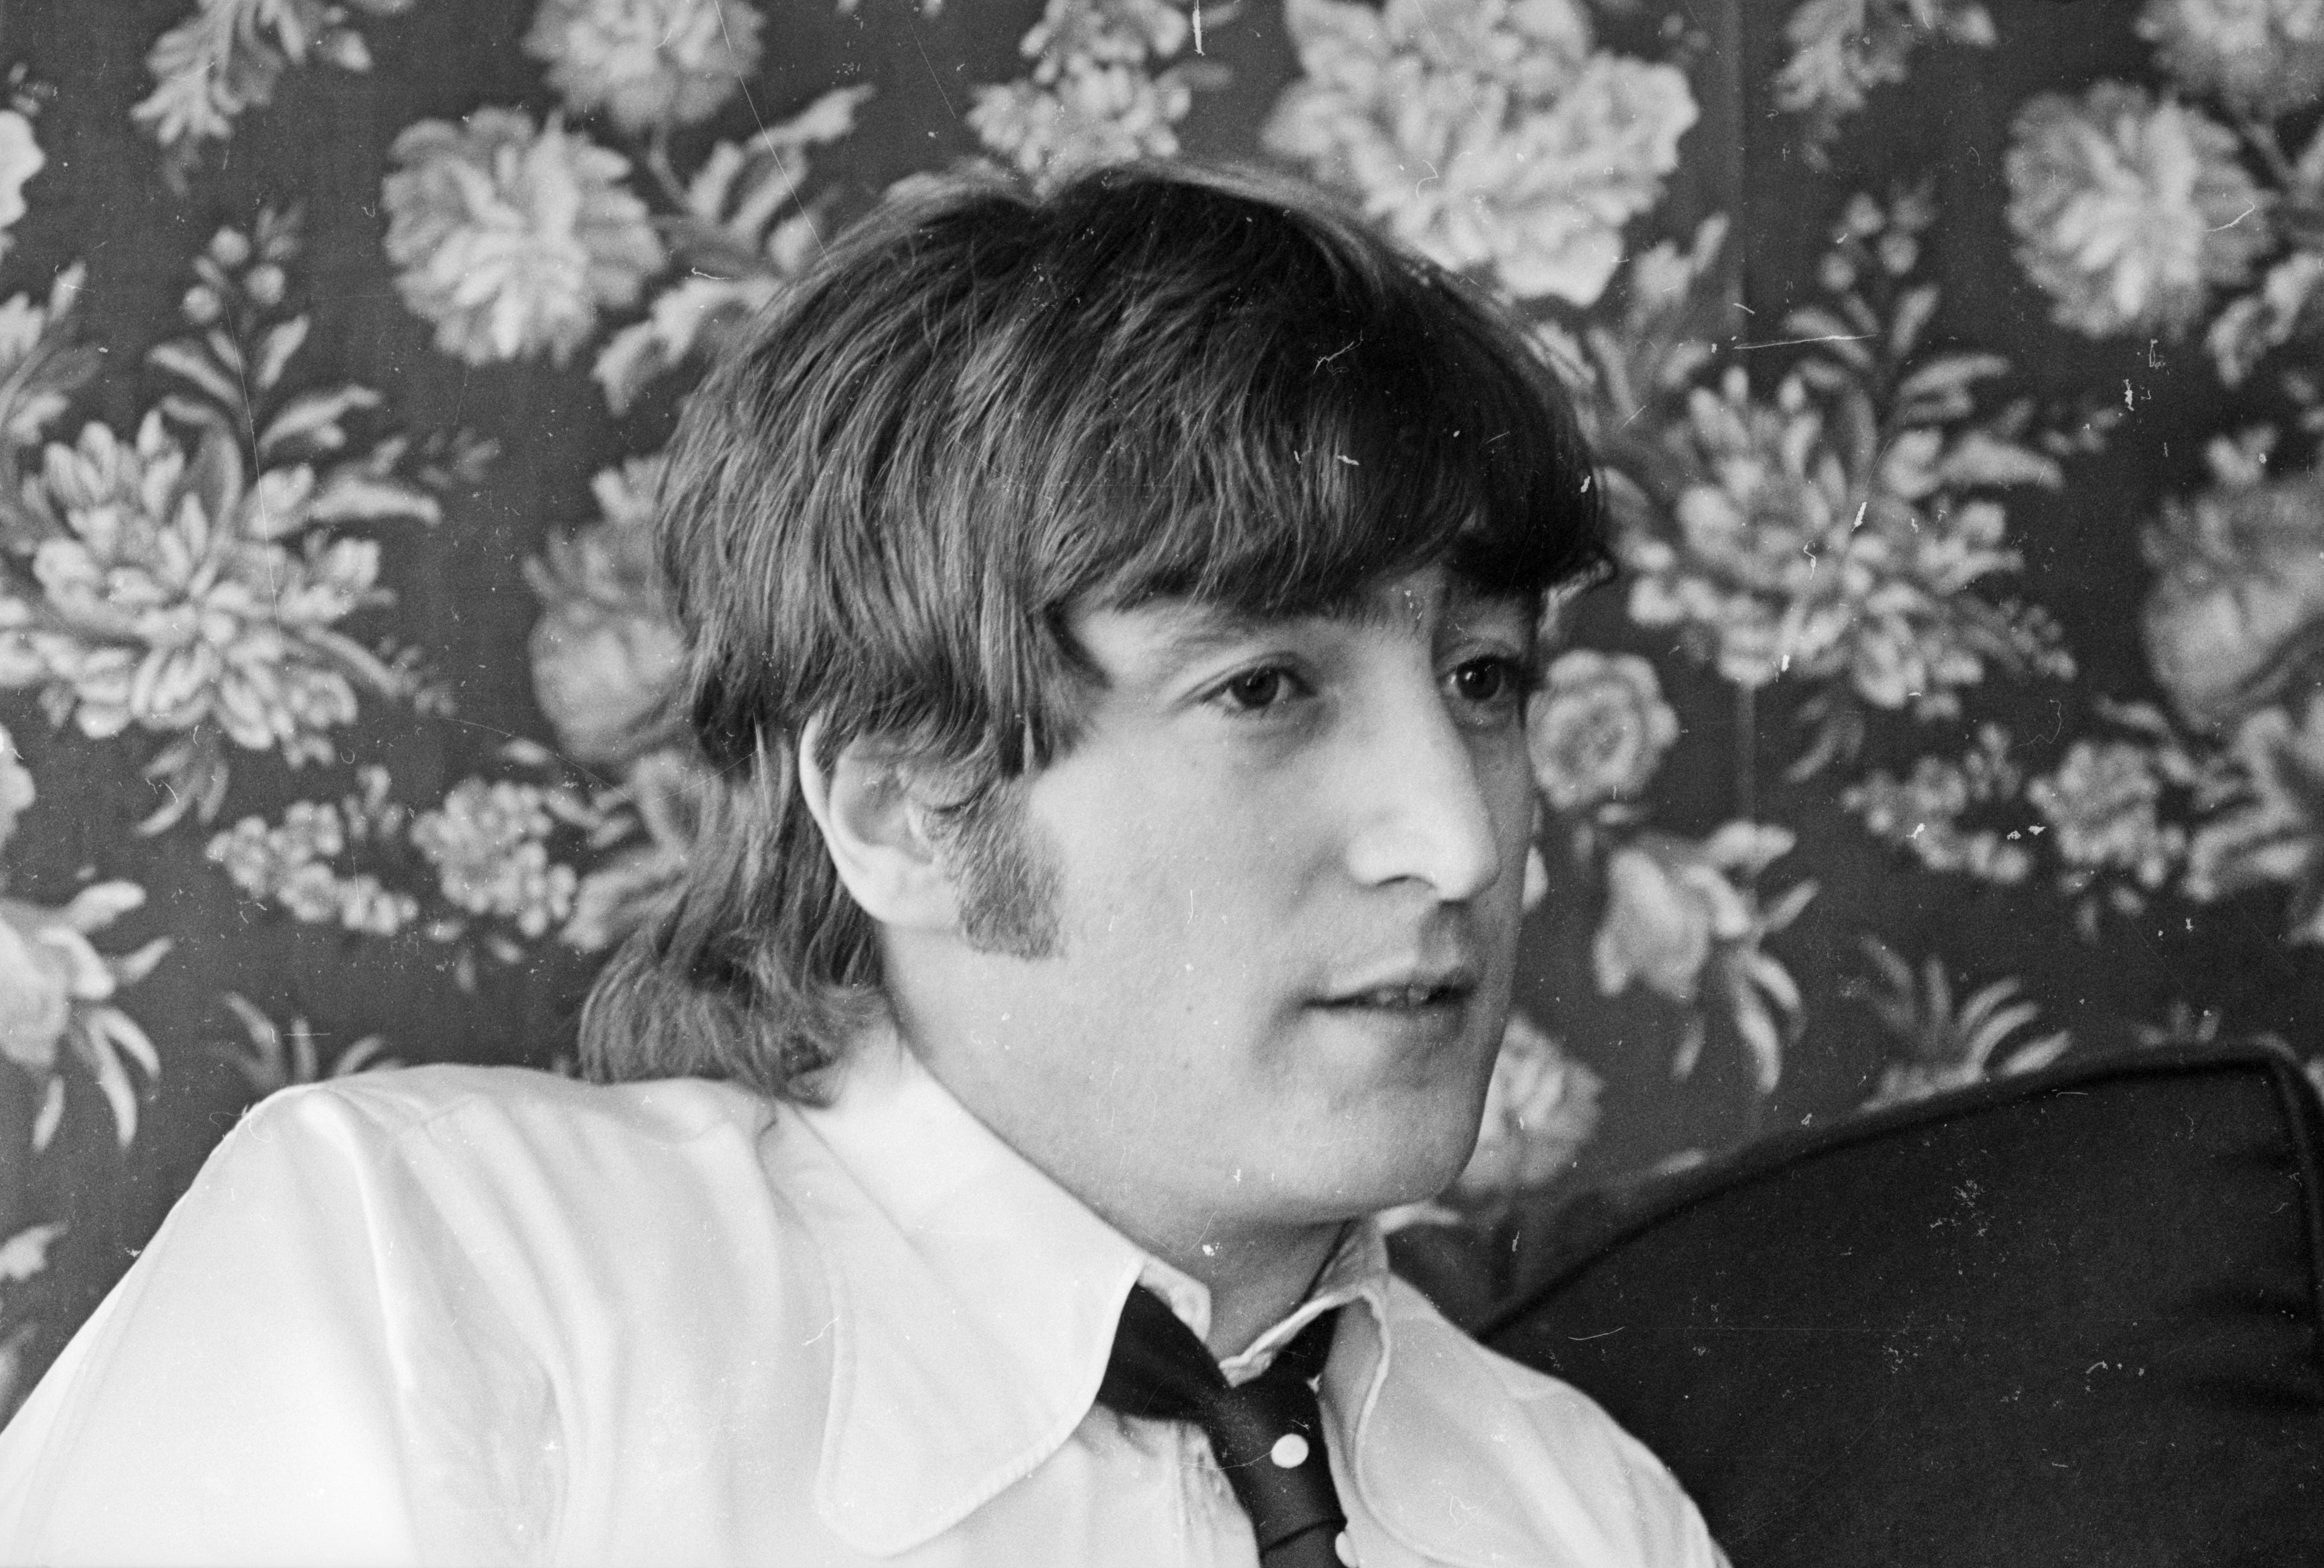 John Lennon (1940 - 1980) of the Beatles, after making a formal apology for his controversial statement that the group were 'more popular than Jesus'